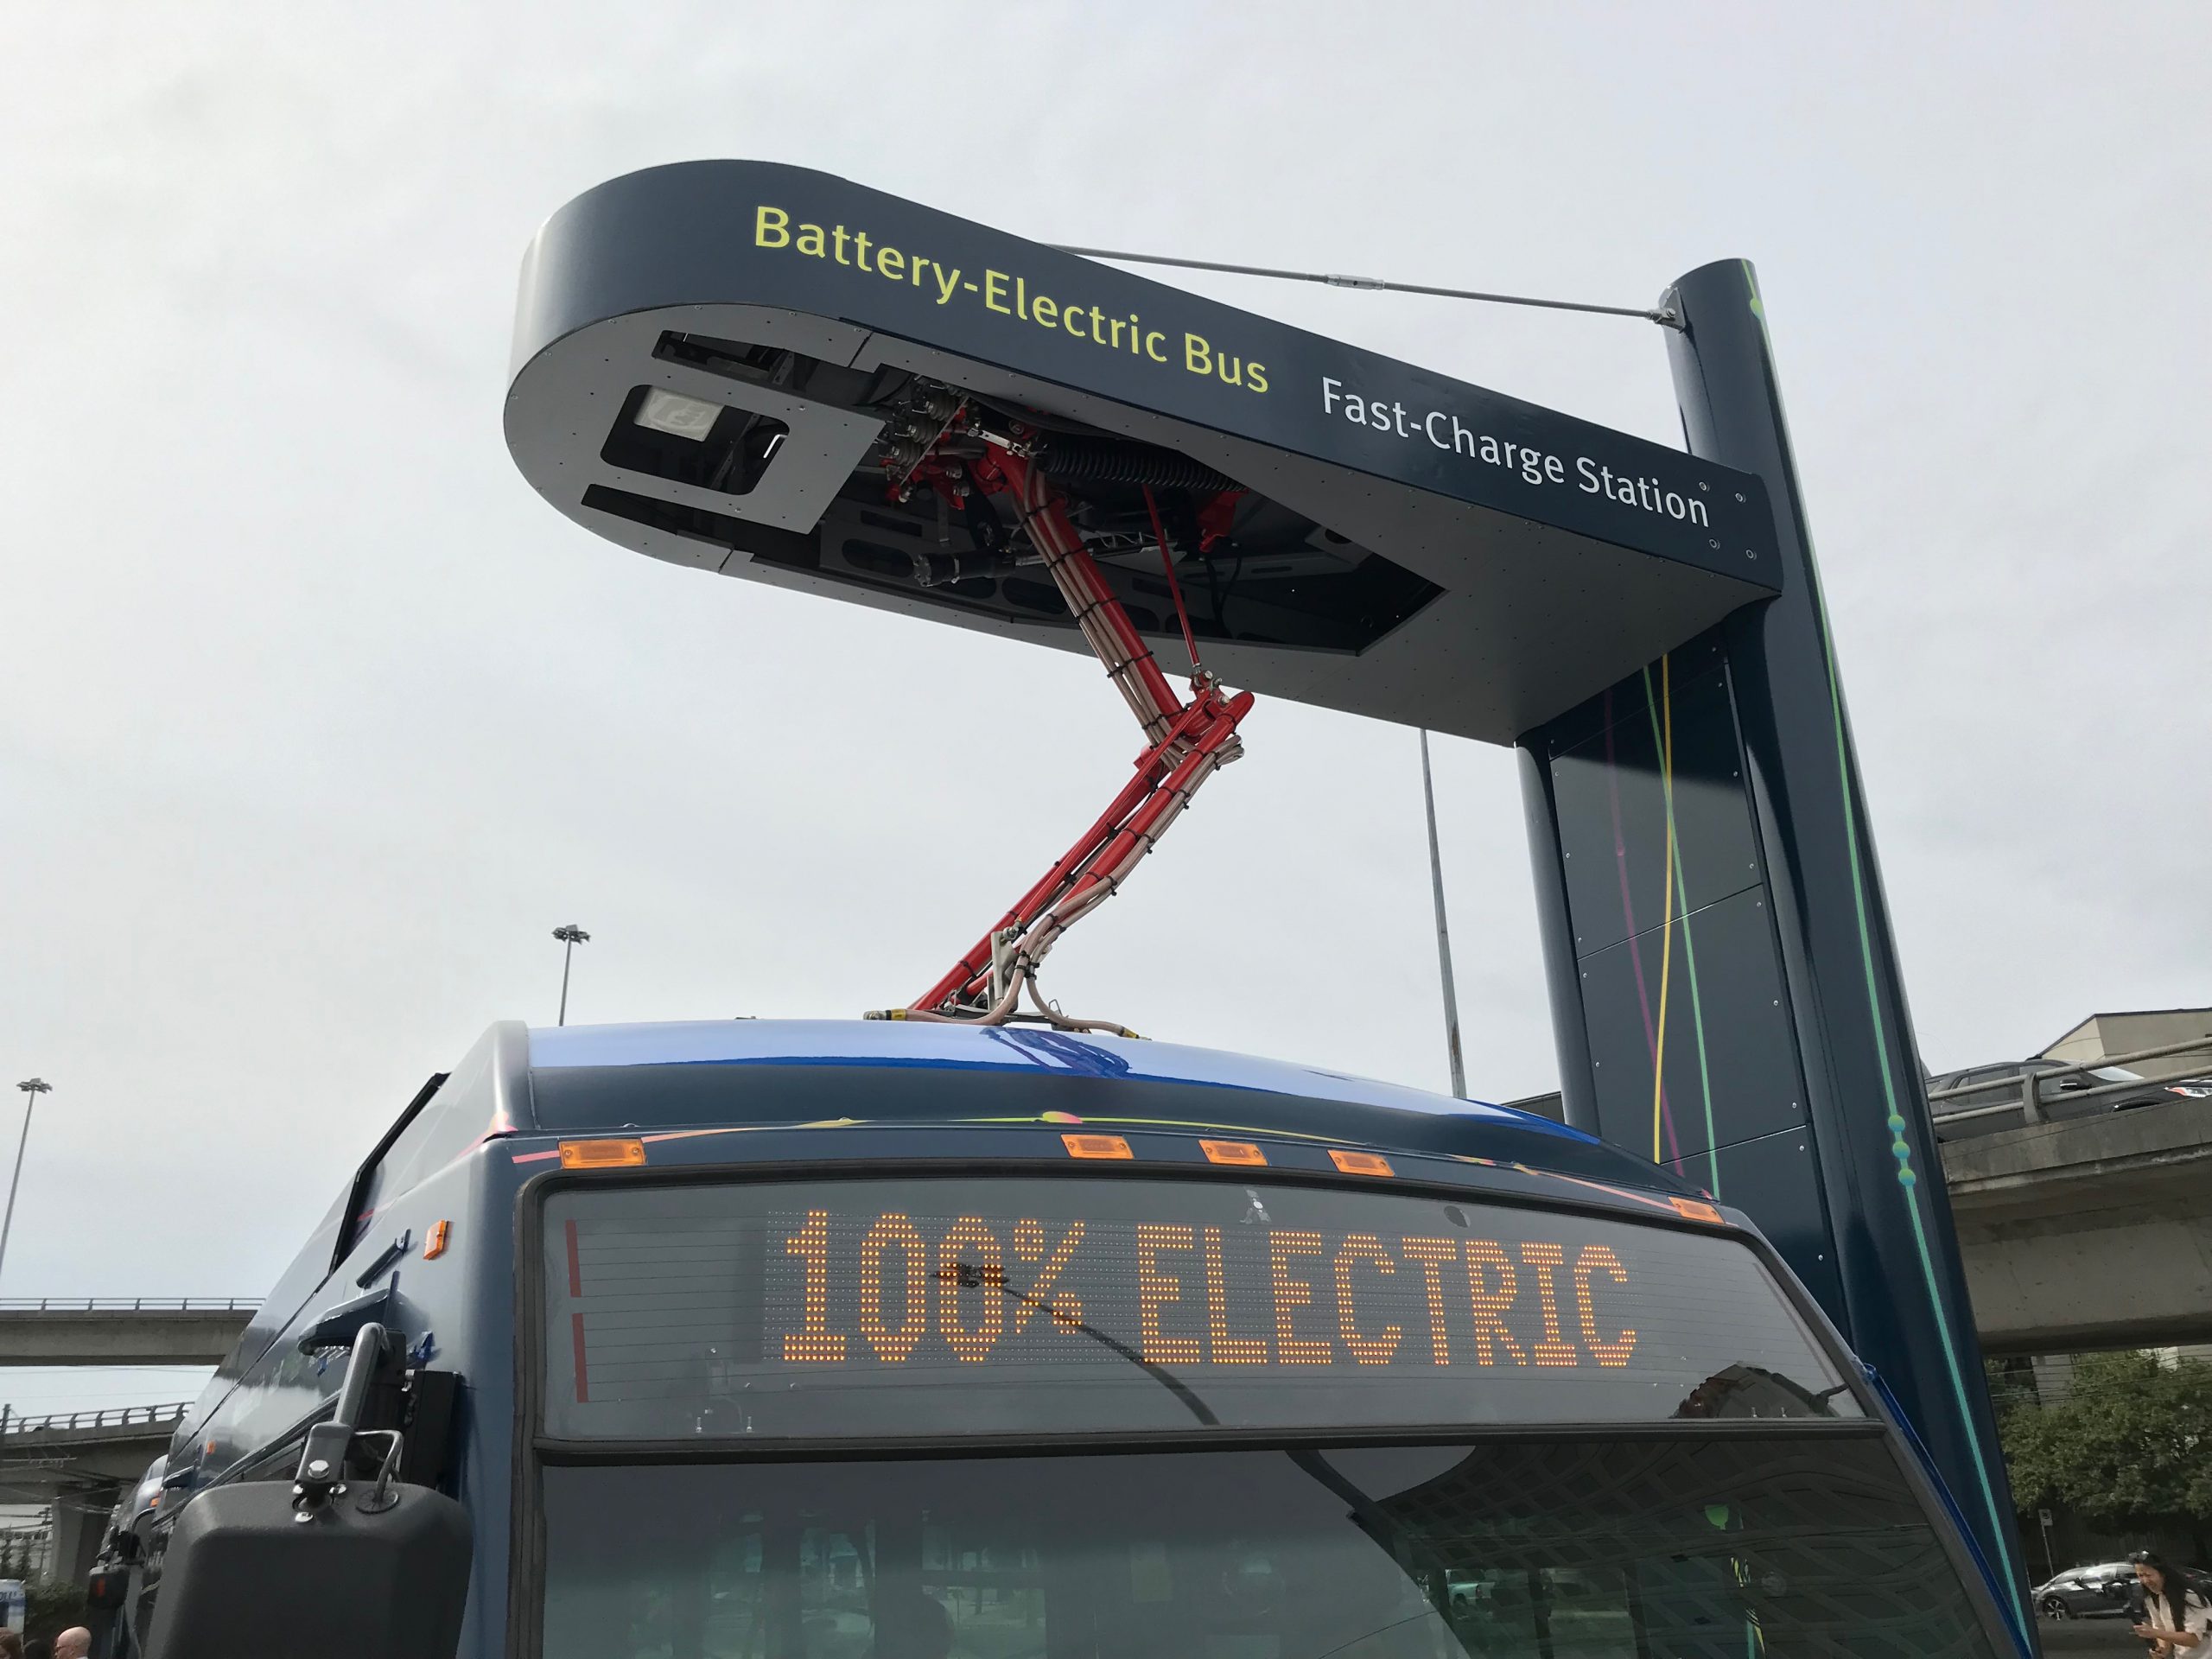 The battery-electric bus charging at Marpole Loop